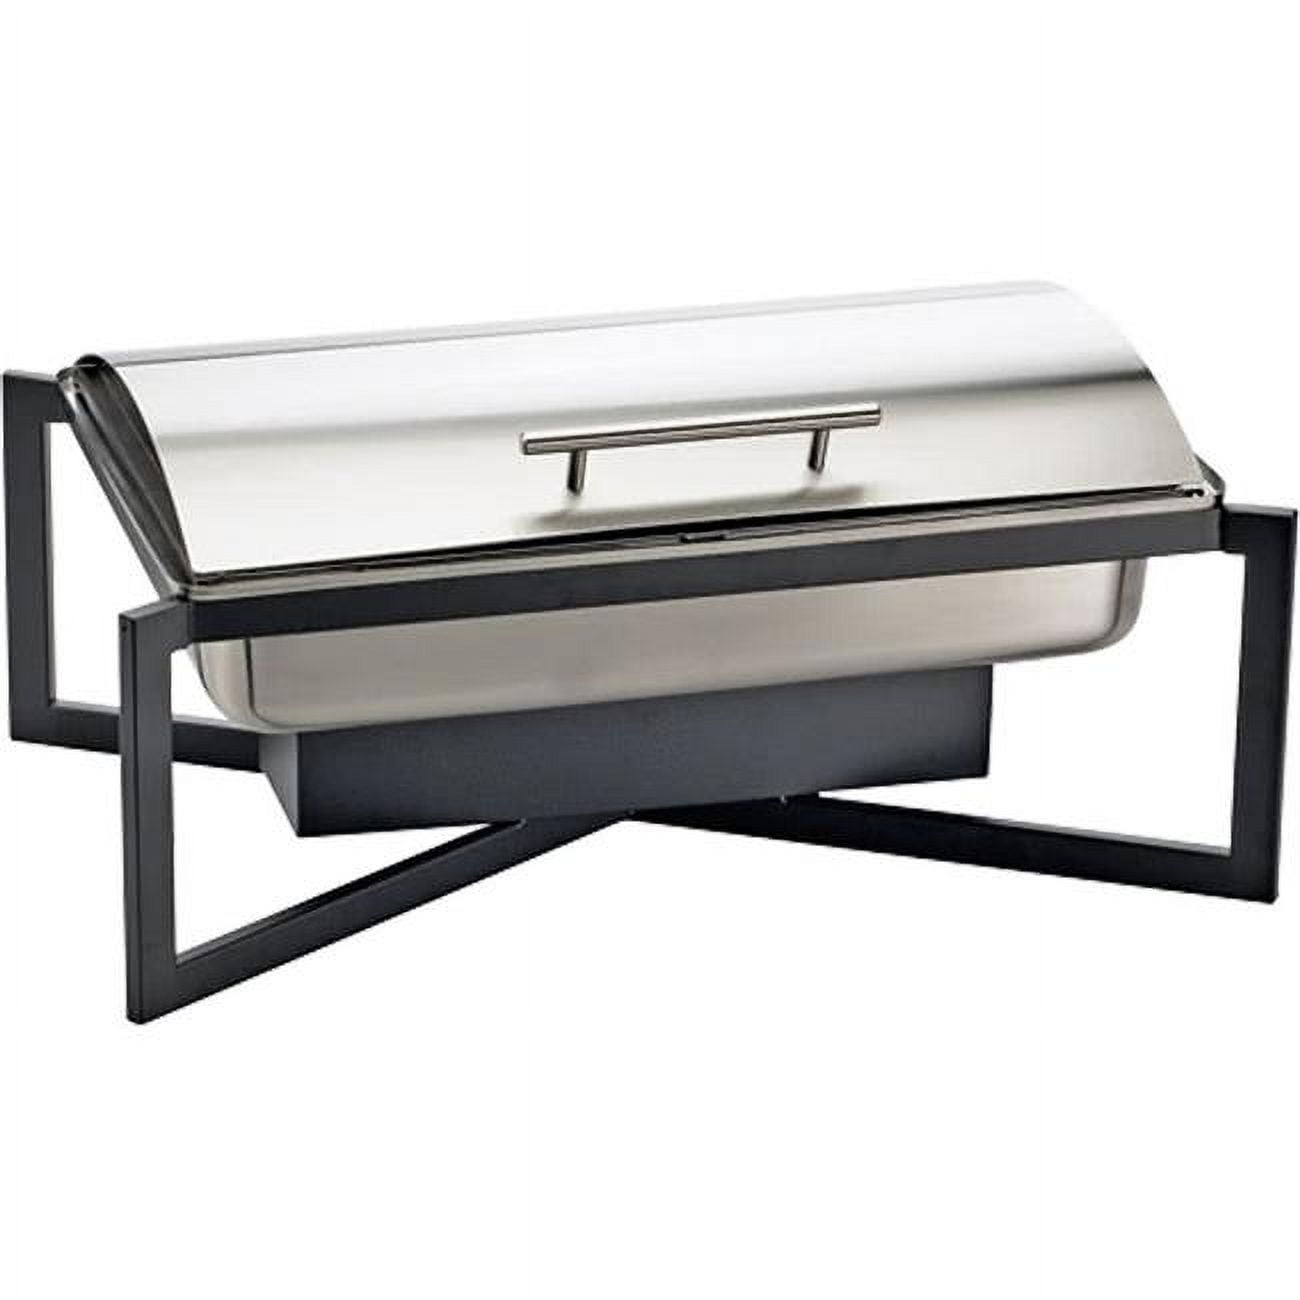 3321-13 1 X 1 In. Chafer Stand - Black